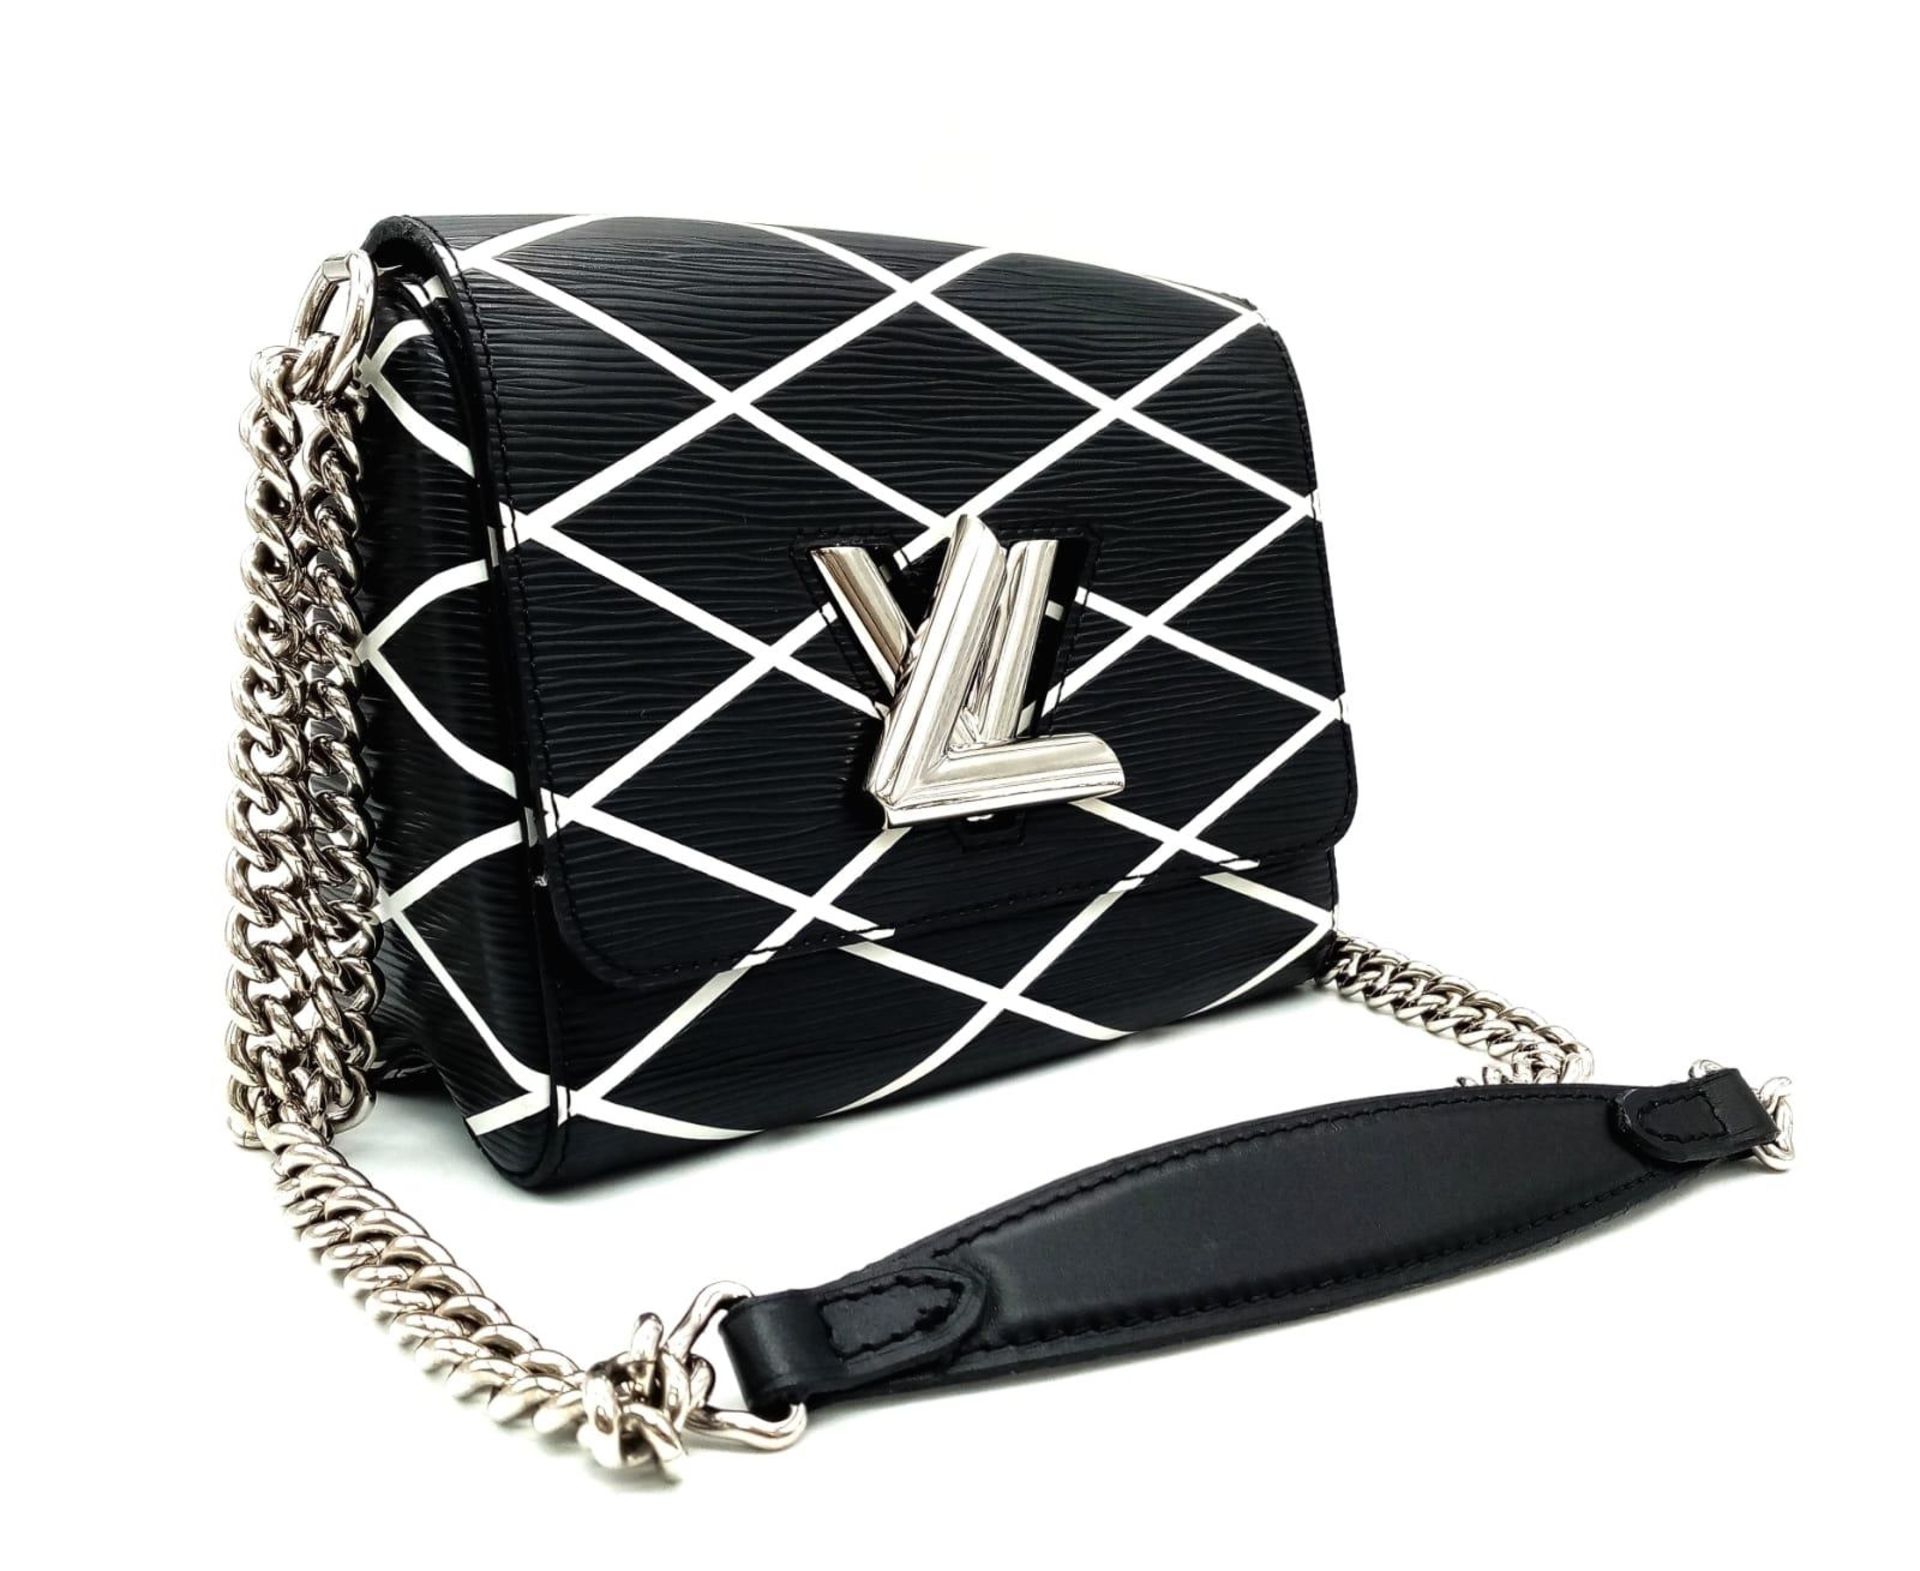 A Louis Vuitton Twist Shoulder Bag in Black Epi Leather with White Diamond Pattern, Silver Coloured - Image 2 of 9